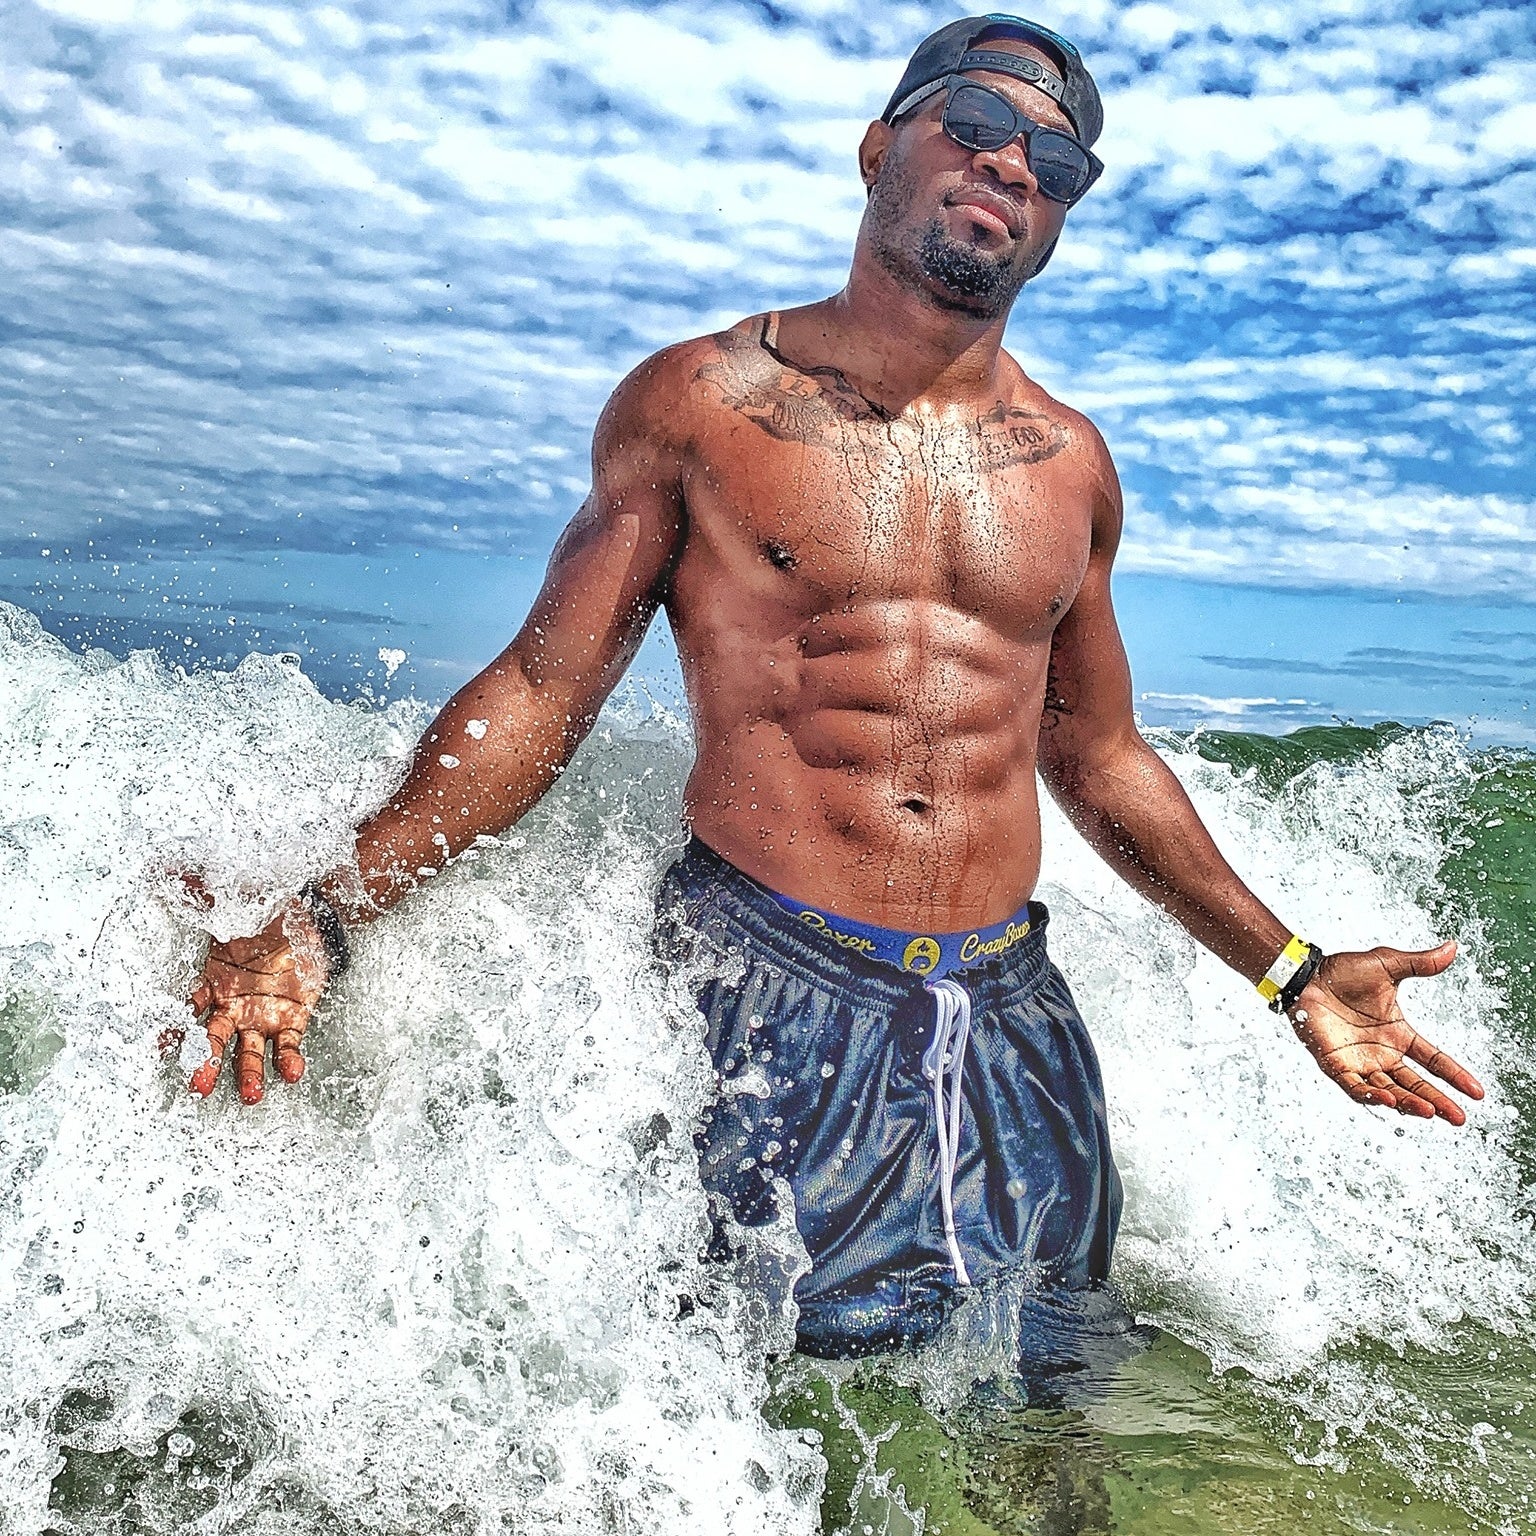 27 Photos of Traveling Black Men That Will Inspire You to Keep Globetrotting